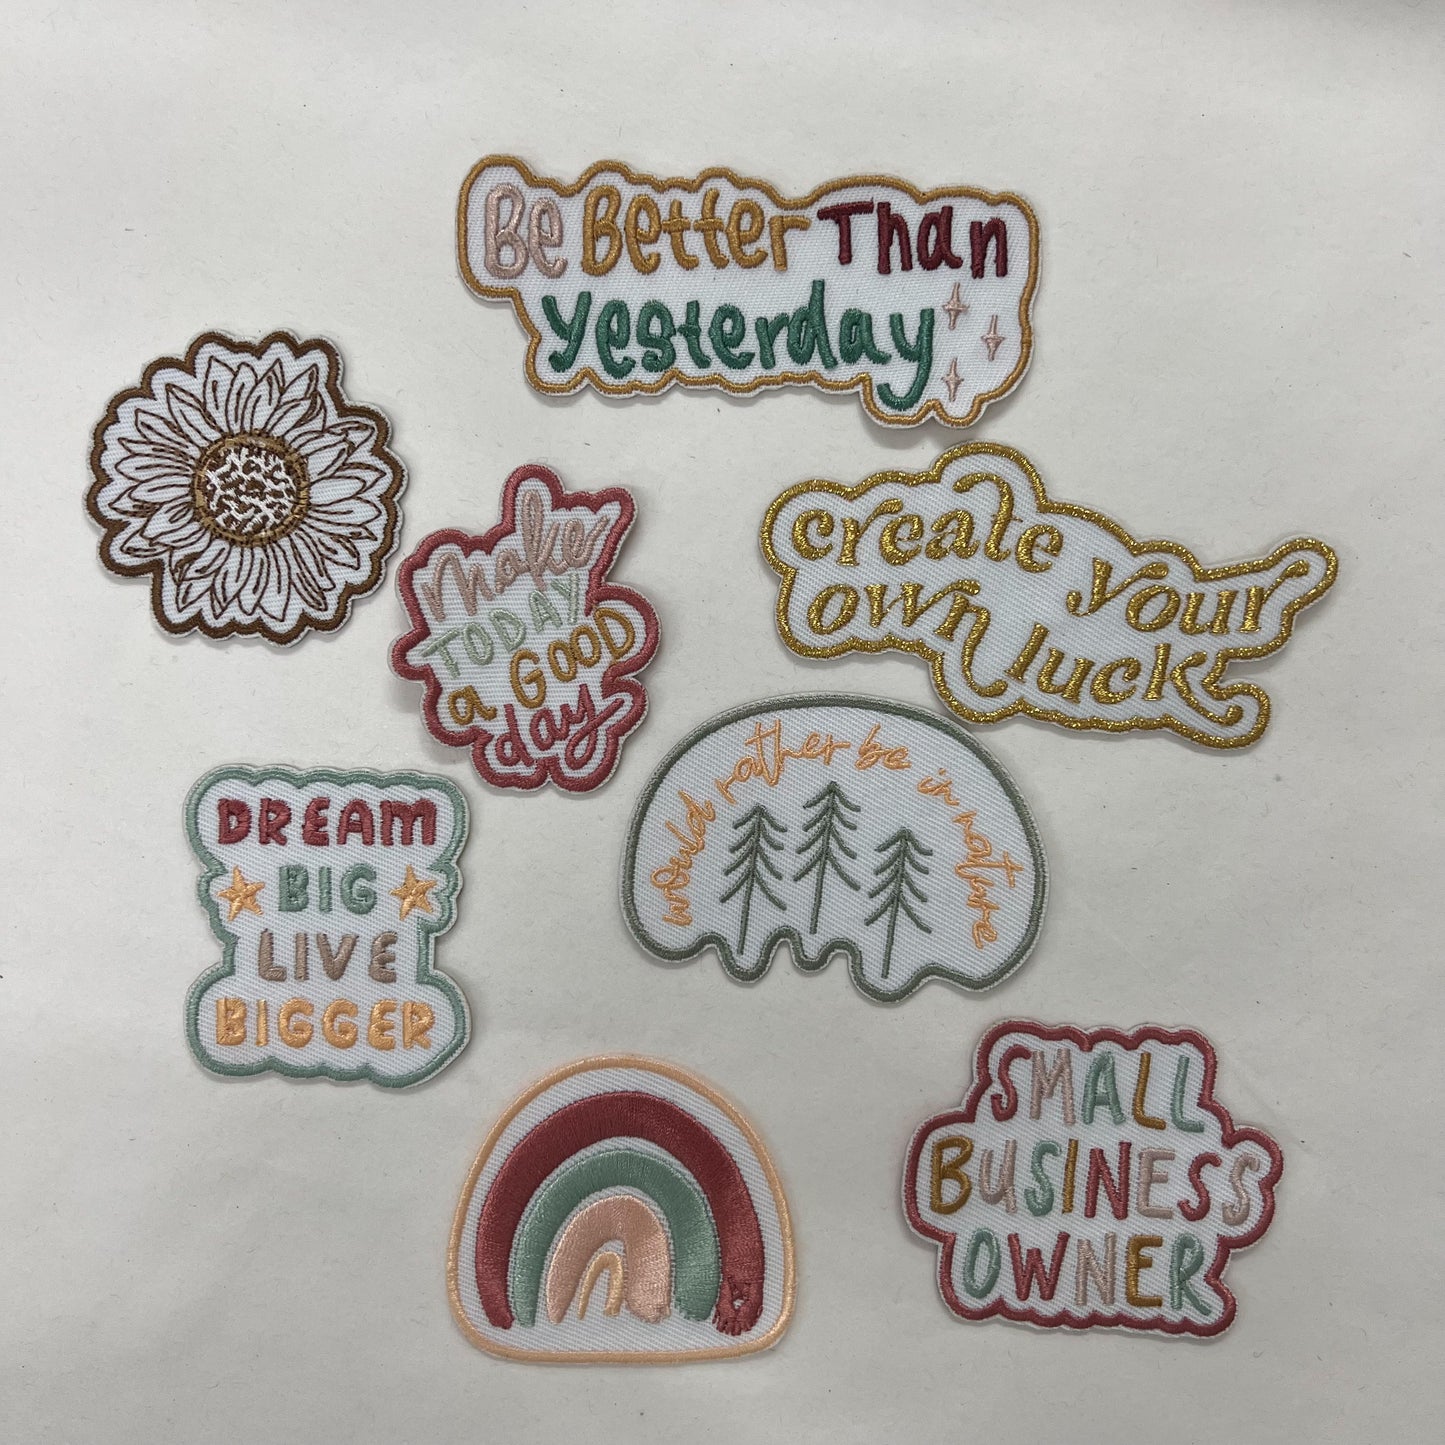 Embroidered Patches! Rainbow, small business owner, nature, sunflower etc